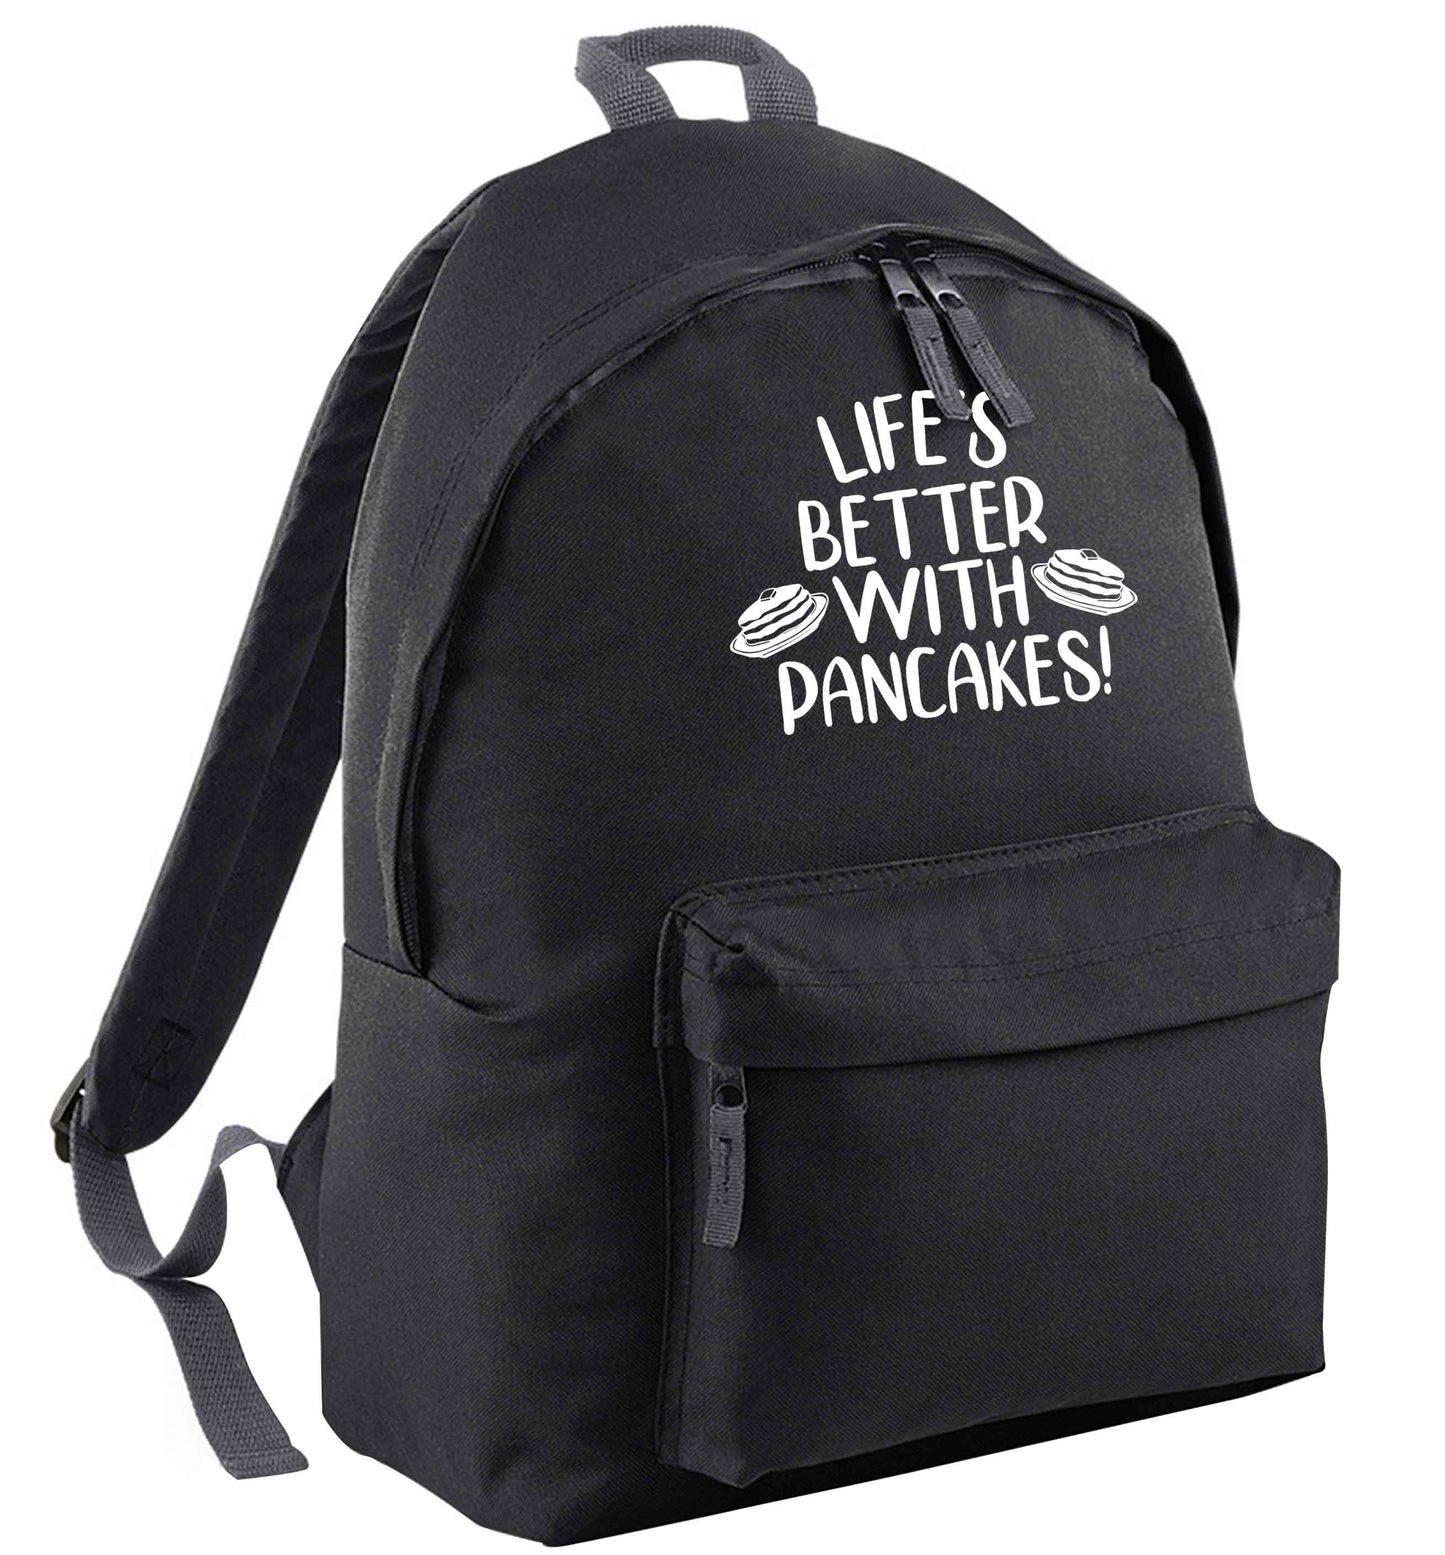 Life's better with pancakes | Adults backpack